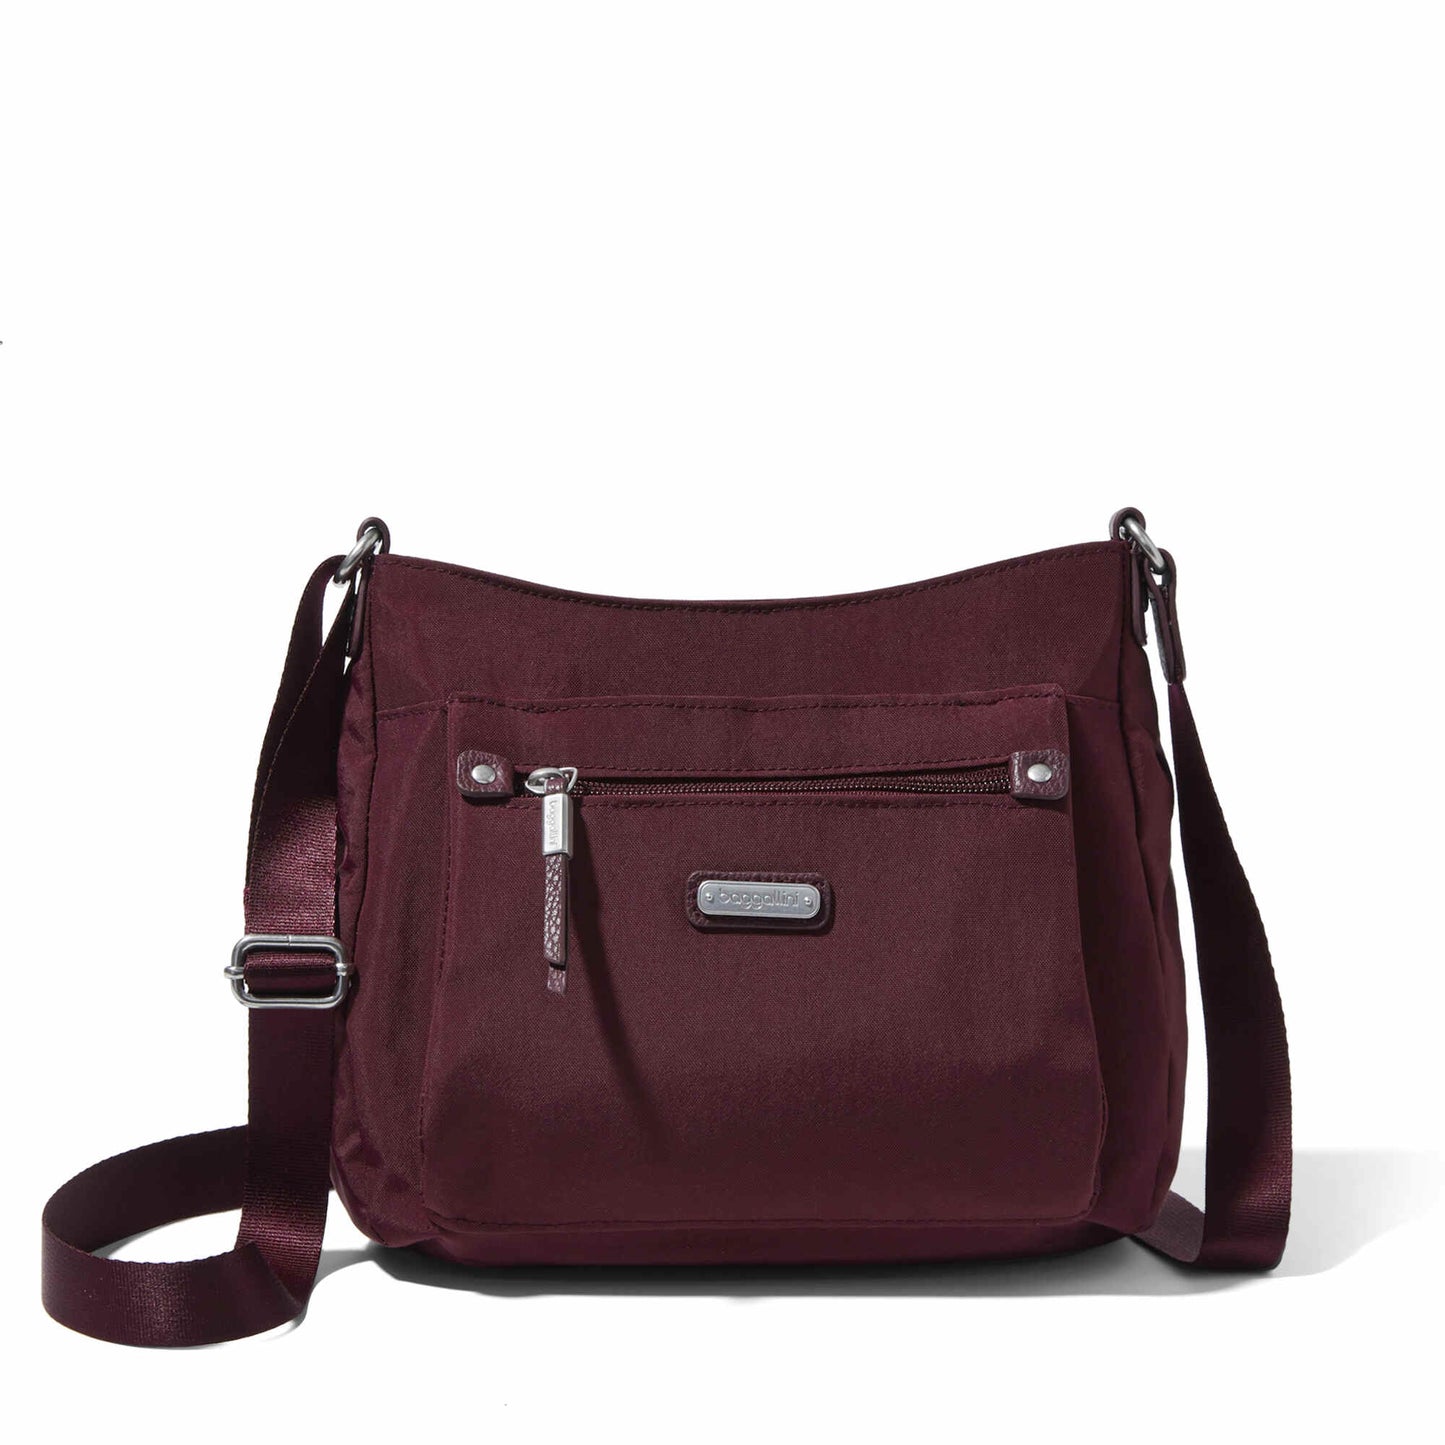 Baggallini Uptown Bagg/Purse With RFID Phone Wristlet